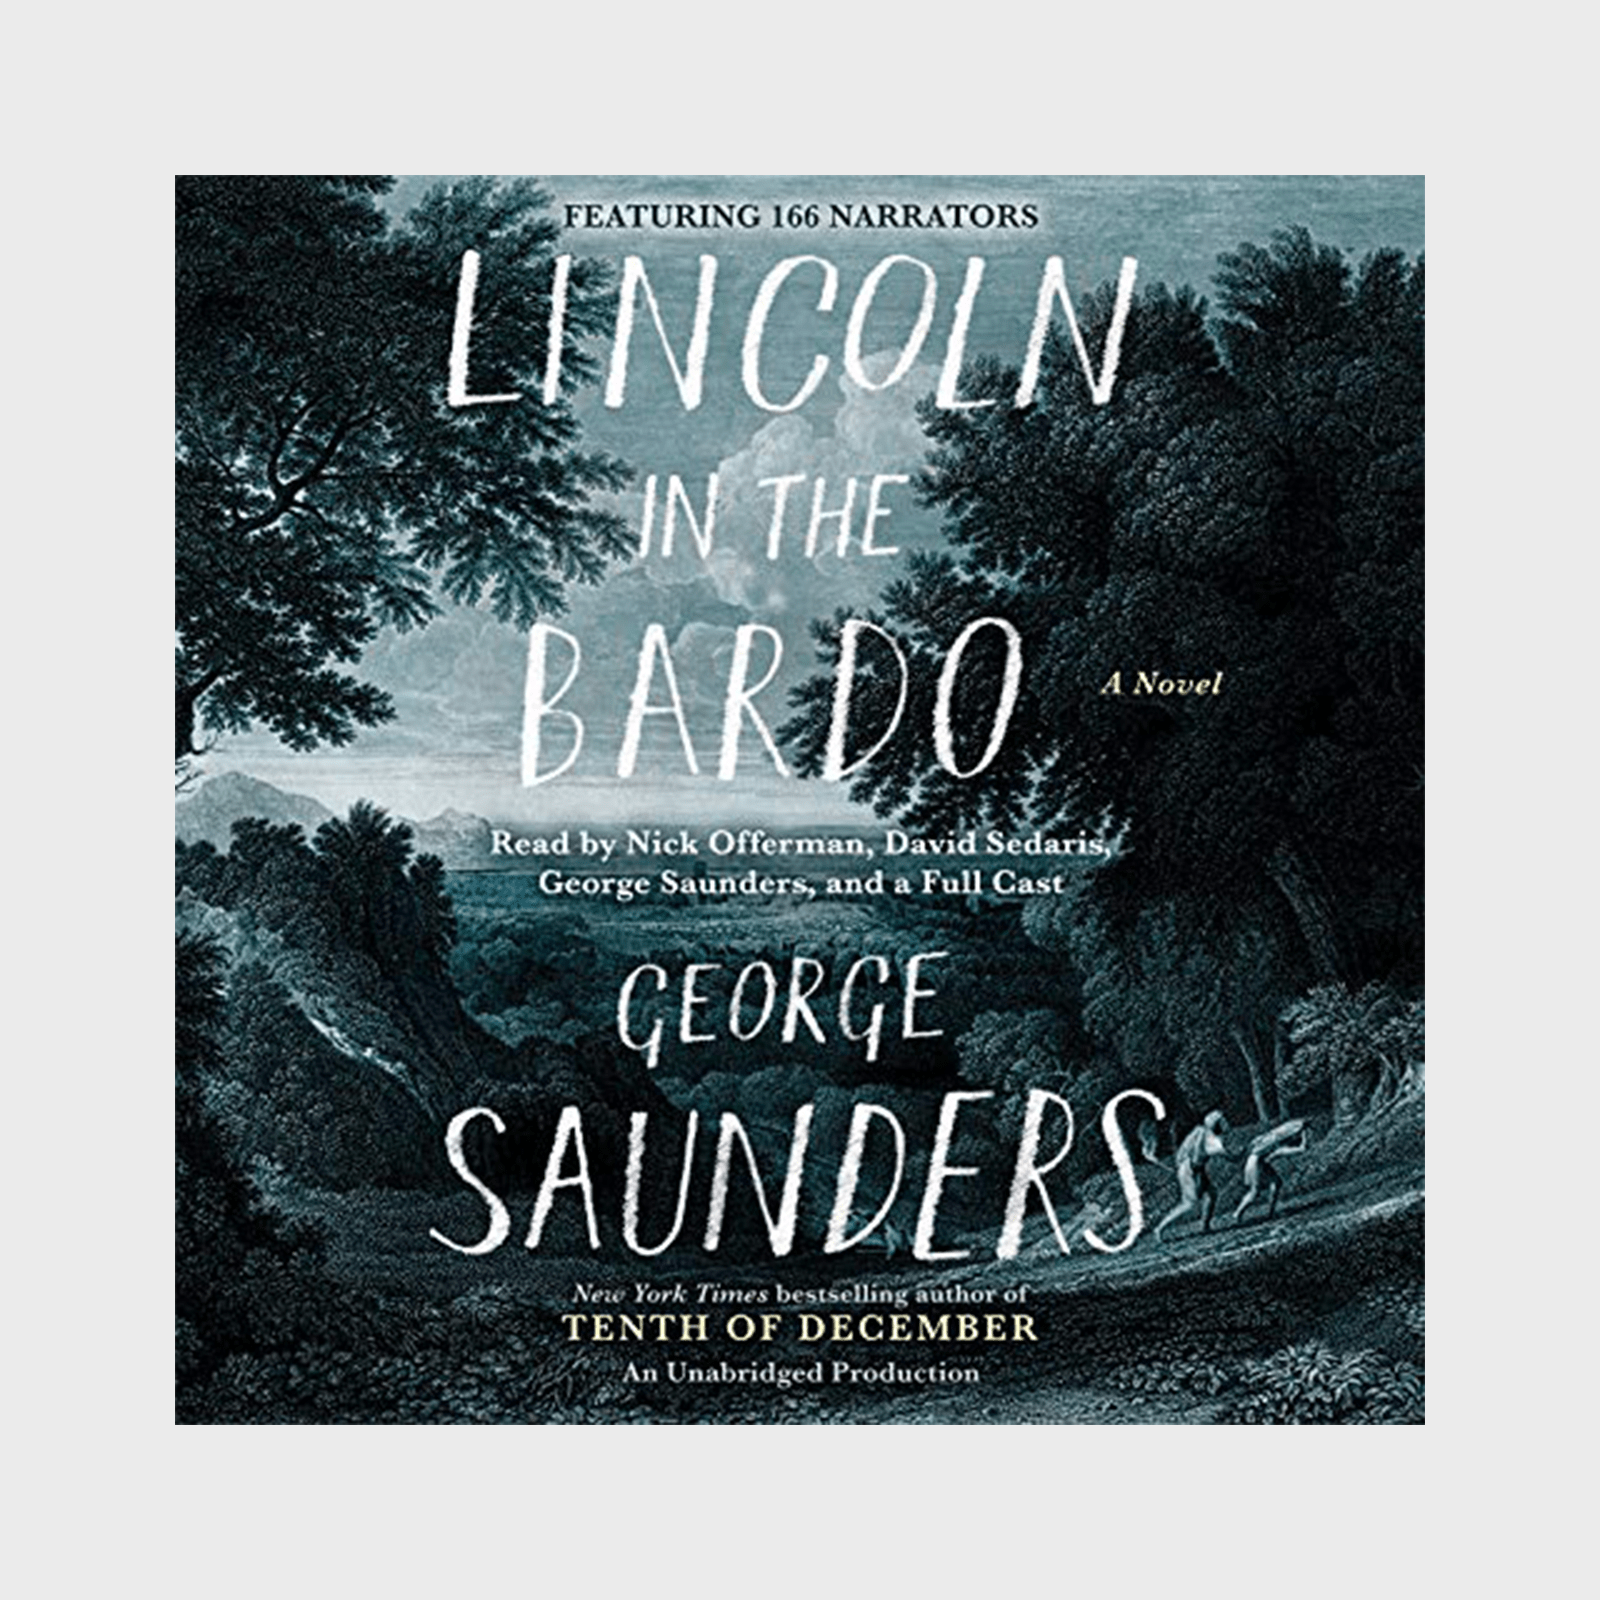 <h3><strong><em>Lincoln in the Bardo </em>by George Saunders</strong></h3> <p><a href="https://www.amazon.com/Lincoln-in-Bardo-George-Saunders-audiobook/dp/B01N1NU4K2/" rel="noopener noreferrer"><em>Lincoln in the Bardo</em></a> is the first novel by acclaimed short story writer George Saunders. He narrates the audiobook with the help of 166 others, including big names such as Susan Sarandon, Julianne Moore, Ben Stiller, and Don Cheadle, in this 2018 winner of the Audie Award for Audiobook of the Year. It's a groundbreaking work of historical fiction that explores a lesser-studied period of Honest Abe's life during the first year of the Civil War, when Lincoln was also dealing with a far more personal tragedy: the death of his 11-year-old son, Willie. This experimental novel, which won the 2017 Man Booker Prize, takes place over the course of one evening in a space between life and death called the bardo, where ghosts contemplate their existence.</p> <p class="listicle-page__cta-button-shop"><a class="shop-btn" href="https://www.amazon.com/Lincoln-in-Bardo-George-Saunders-audiobook/dp/B01N1NU4K2/">Shop Now</a></p>